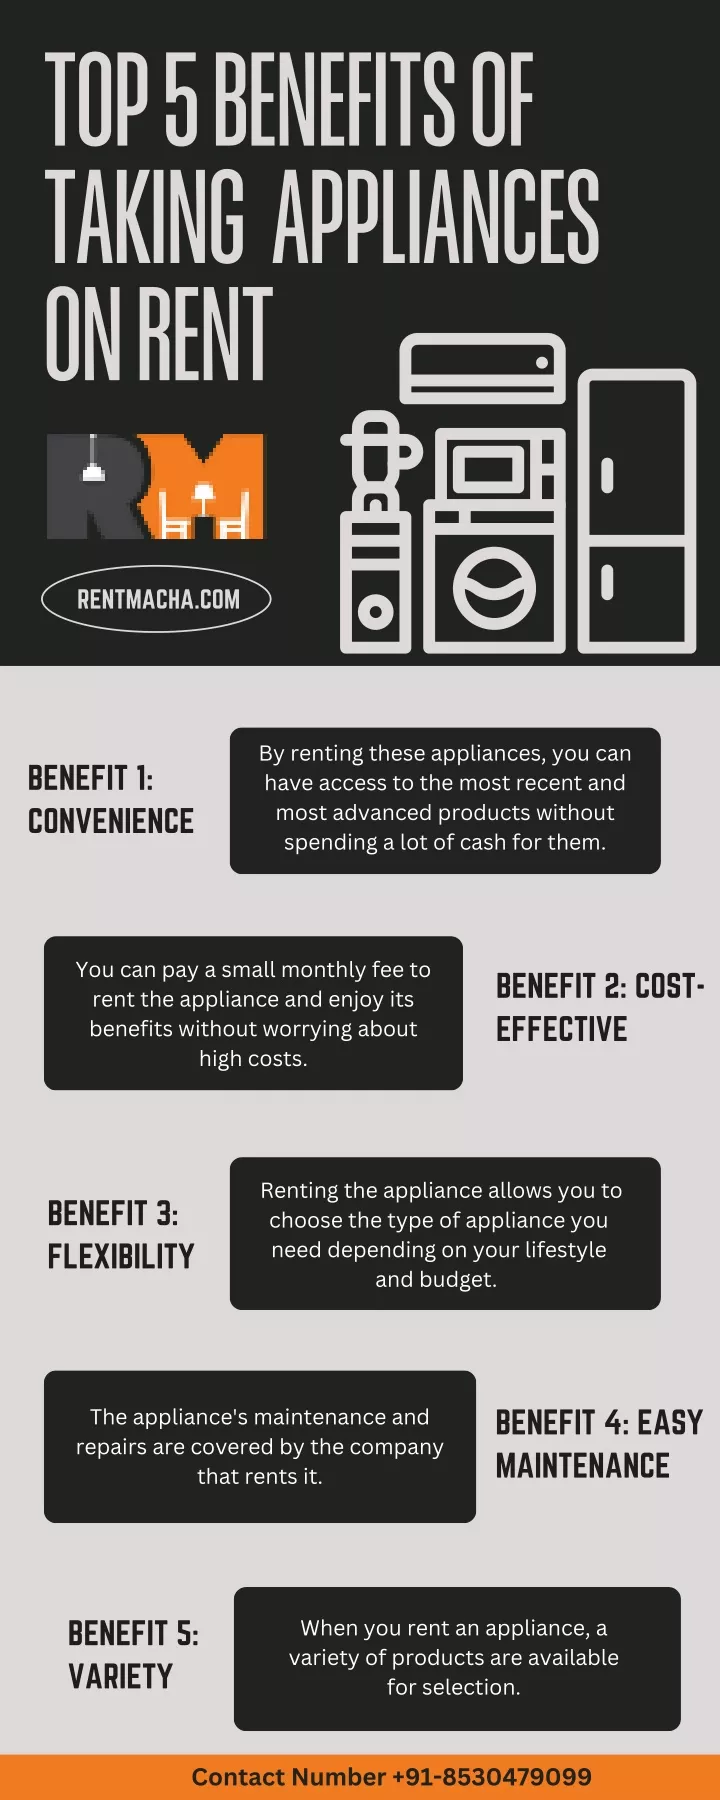 top 5 benefits of taking appliances on rent